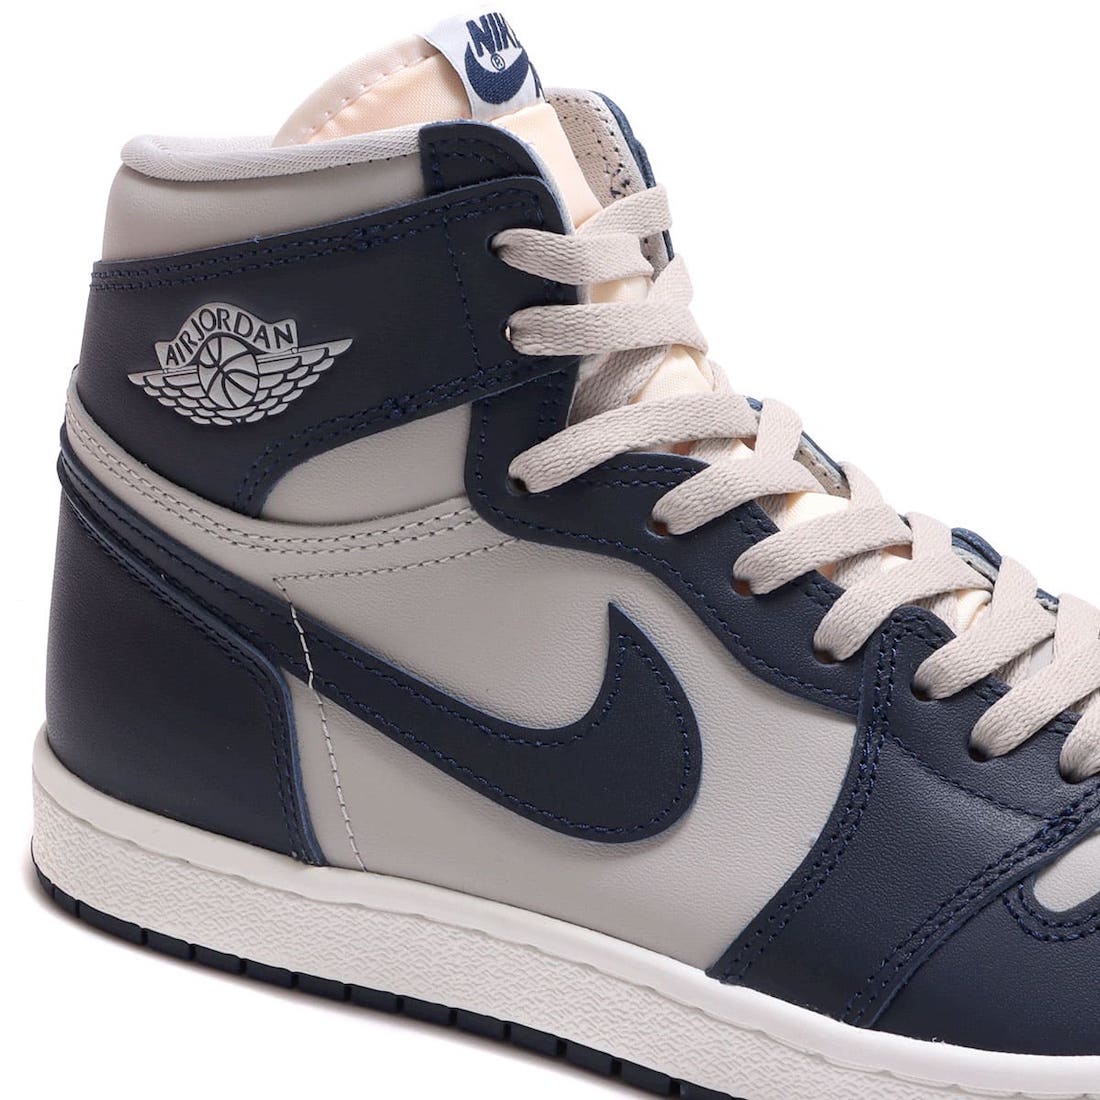 upcoming nike basketball shoes 2019 women clothes High 85 Georgetown College Navy BQ4422-400 Release Date